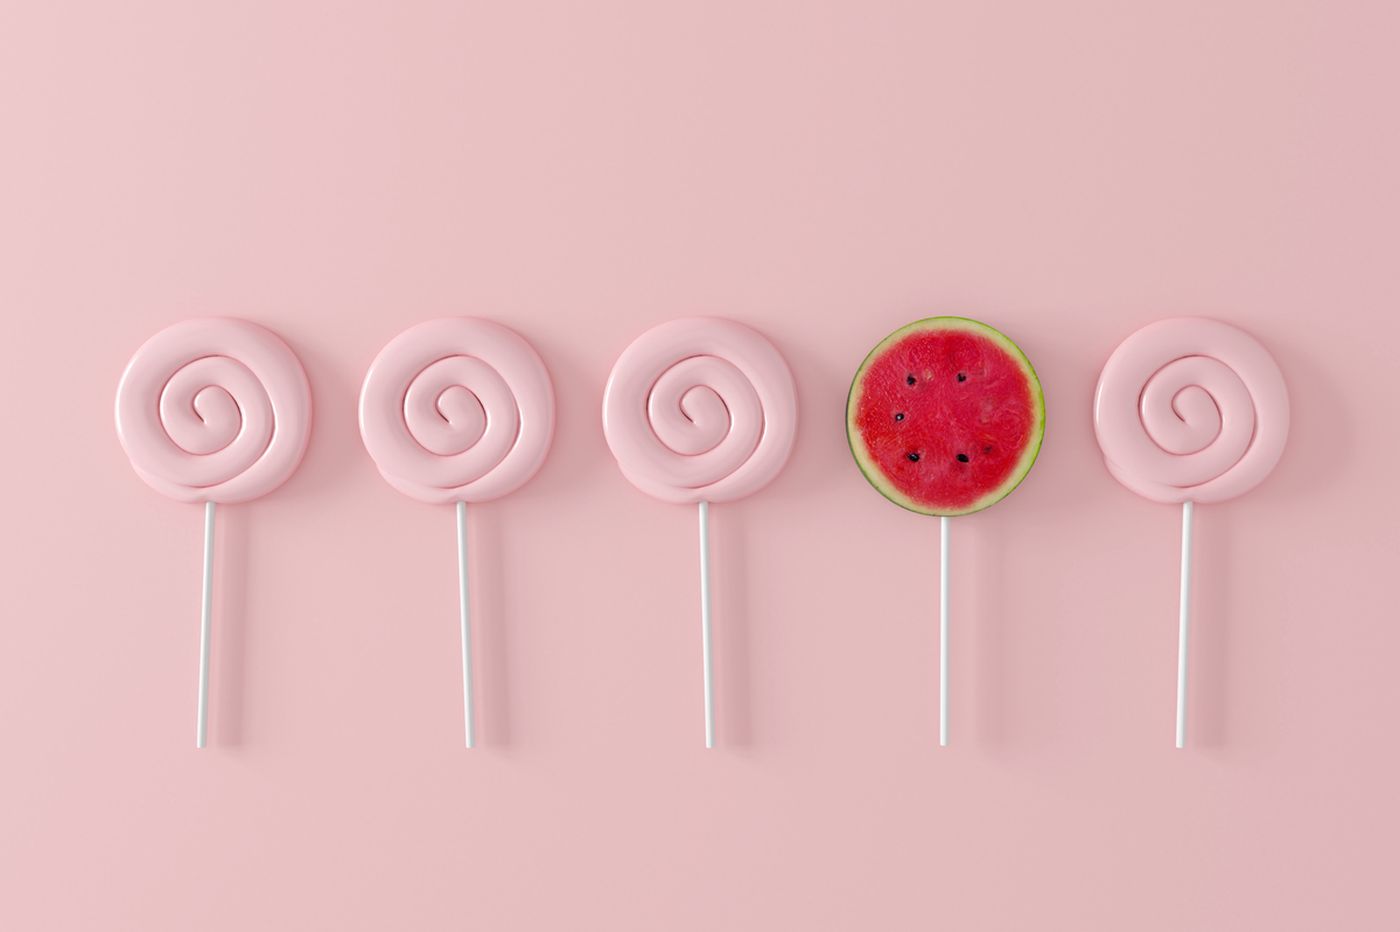 Watermelon candy on pastel pink background.